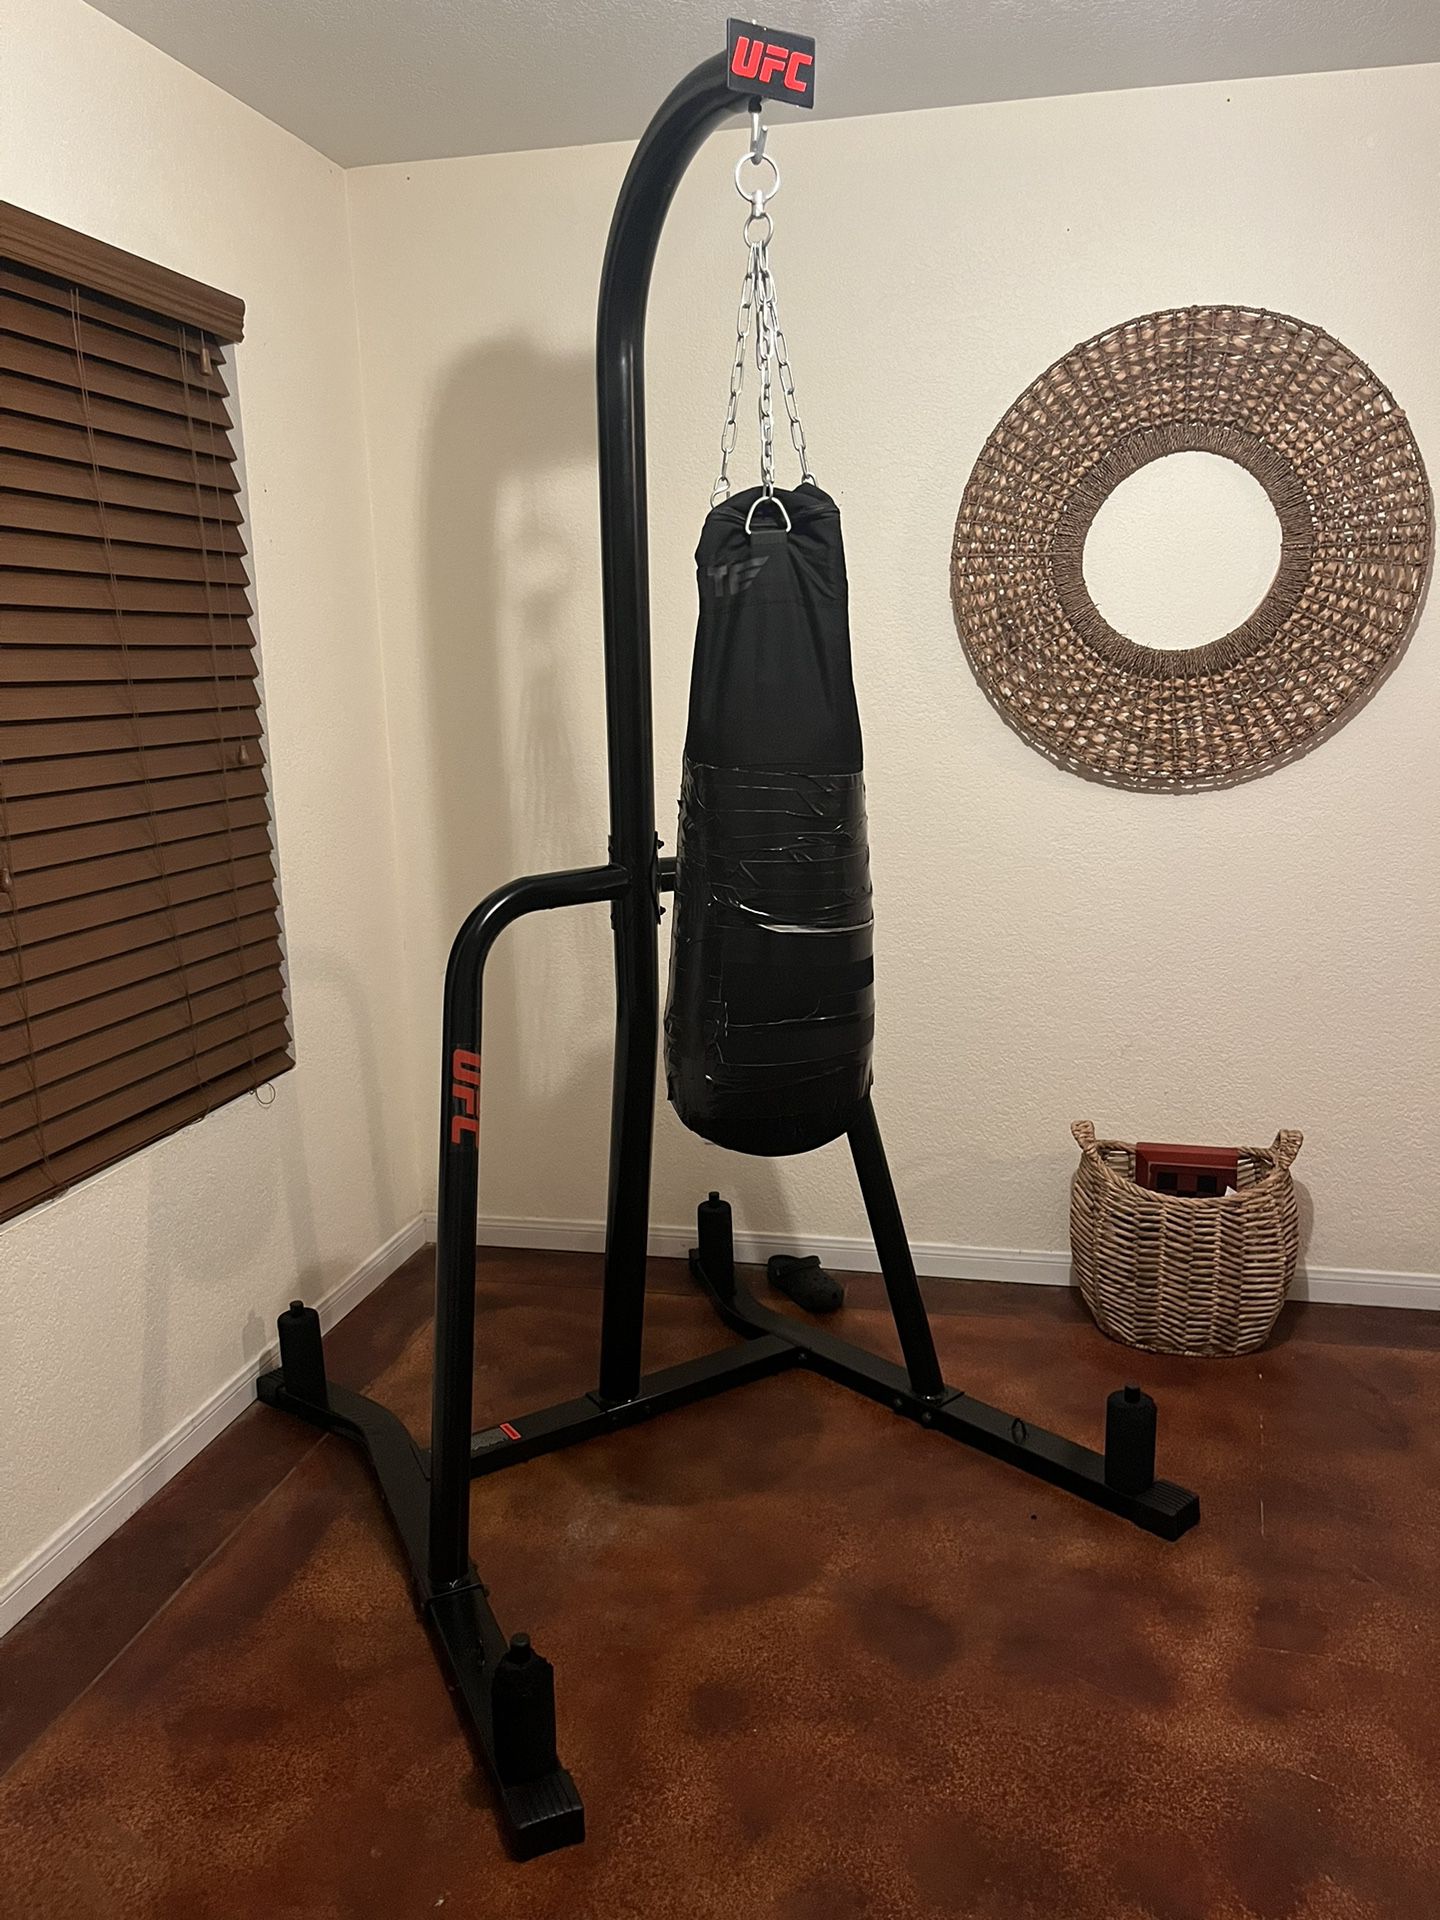 UFC Stand And Punching bag